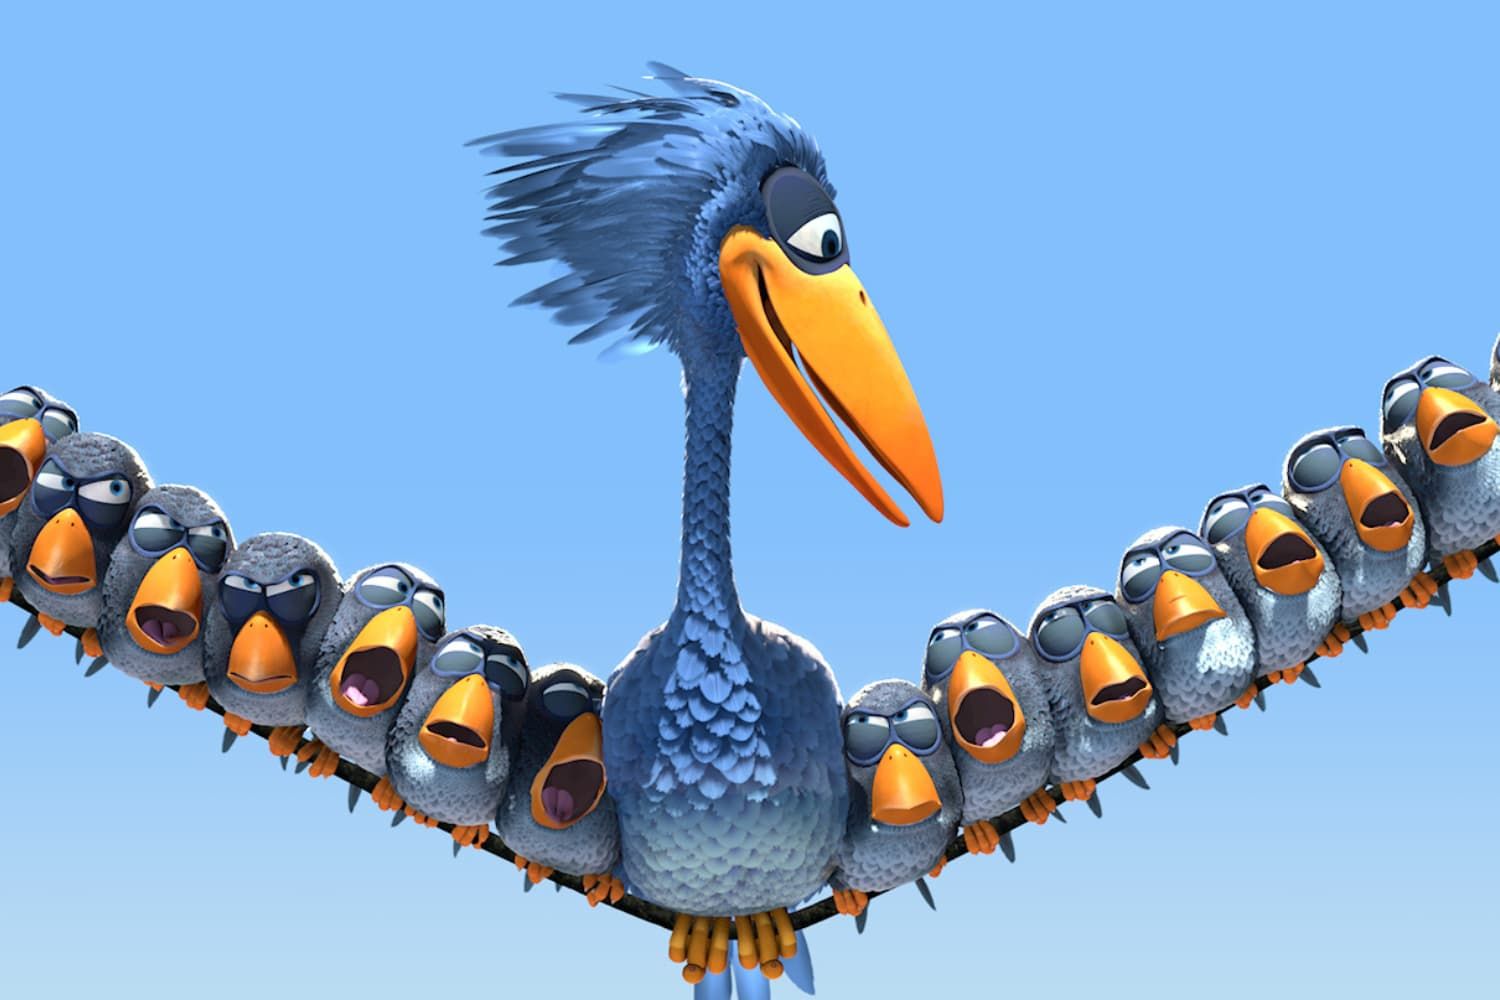 For%20the%20birds%20animation%20video%20Pixar-7d81b3b5 Water